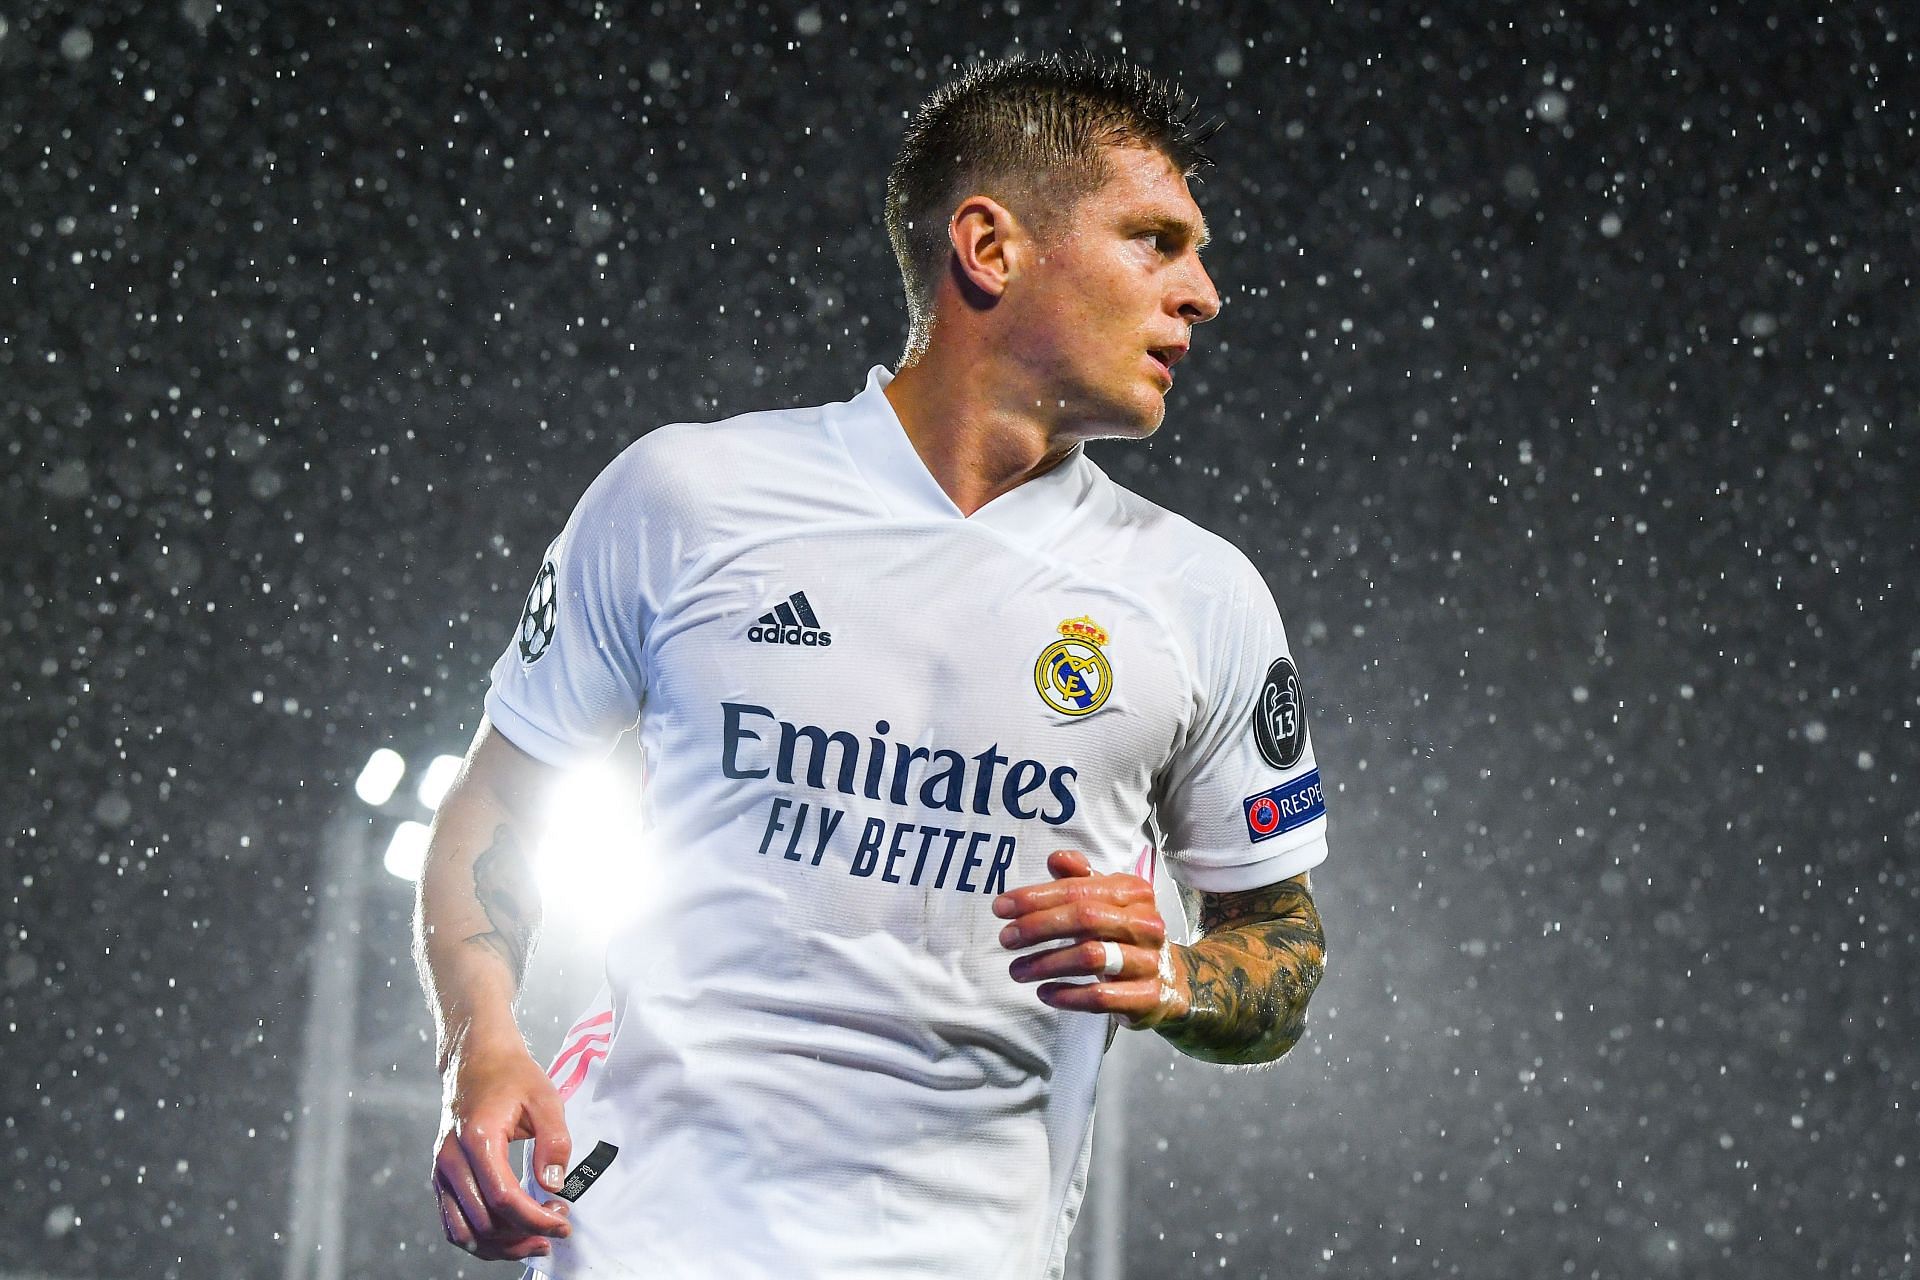 Kroos has been a mainstay for Real Madrid